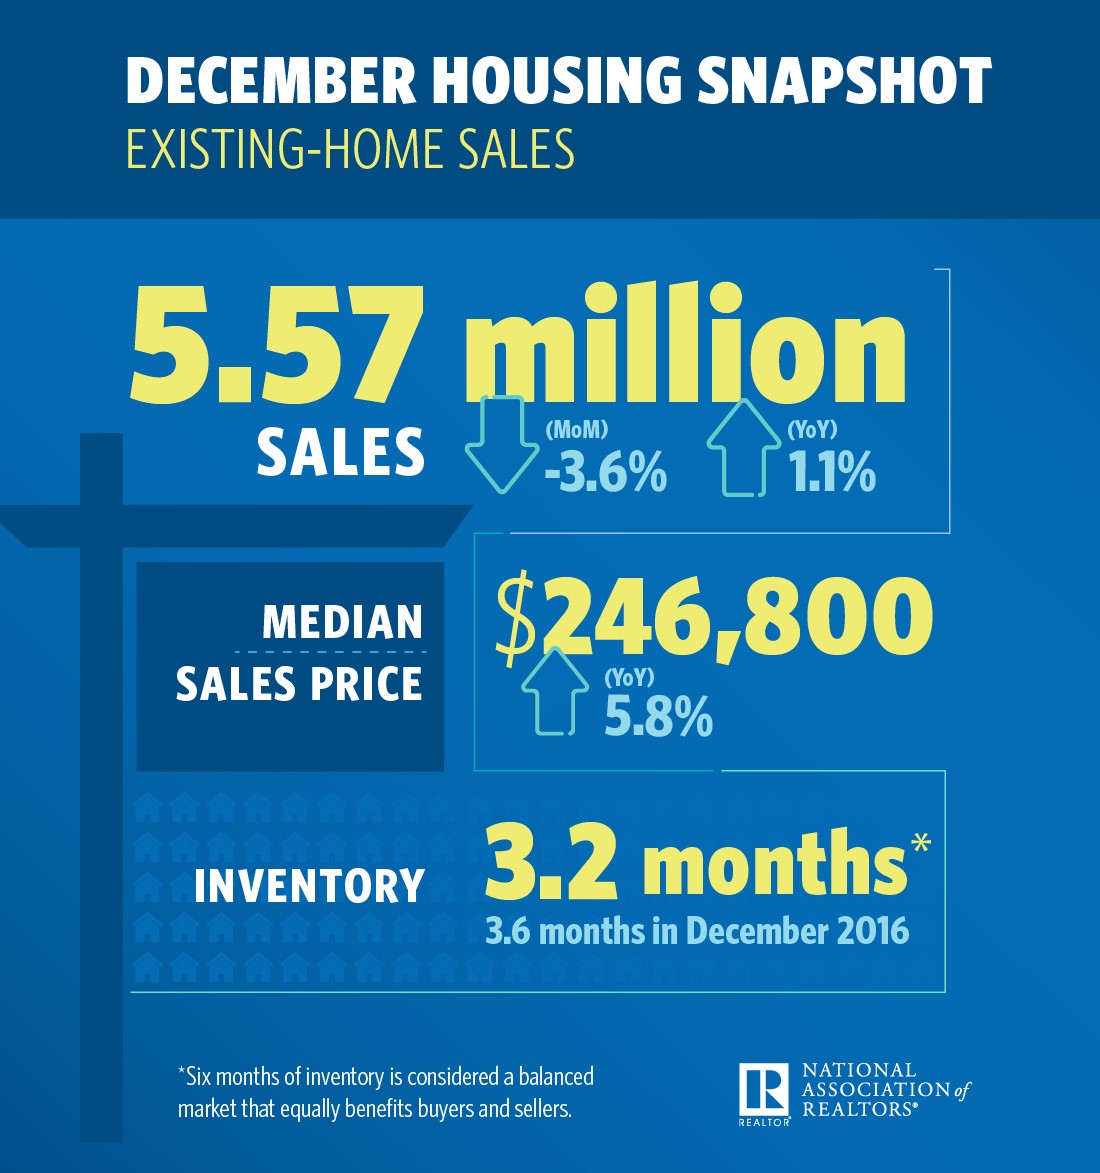 Total existing-home increased 1.1 percent in 2017 to a 5.51 million sales pace, the highest recorded since the 6.48 million sales in 2006, according to the National Association of Realtors (NAR)